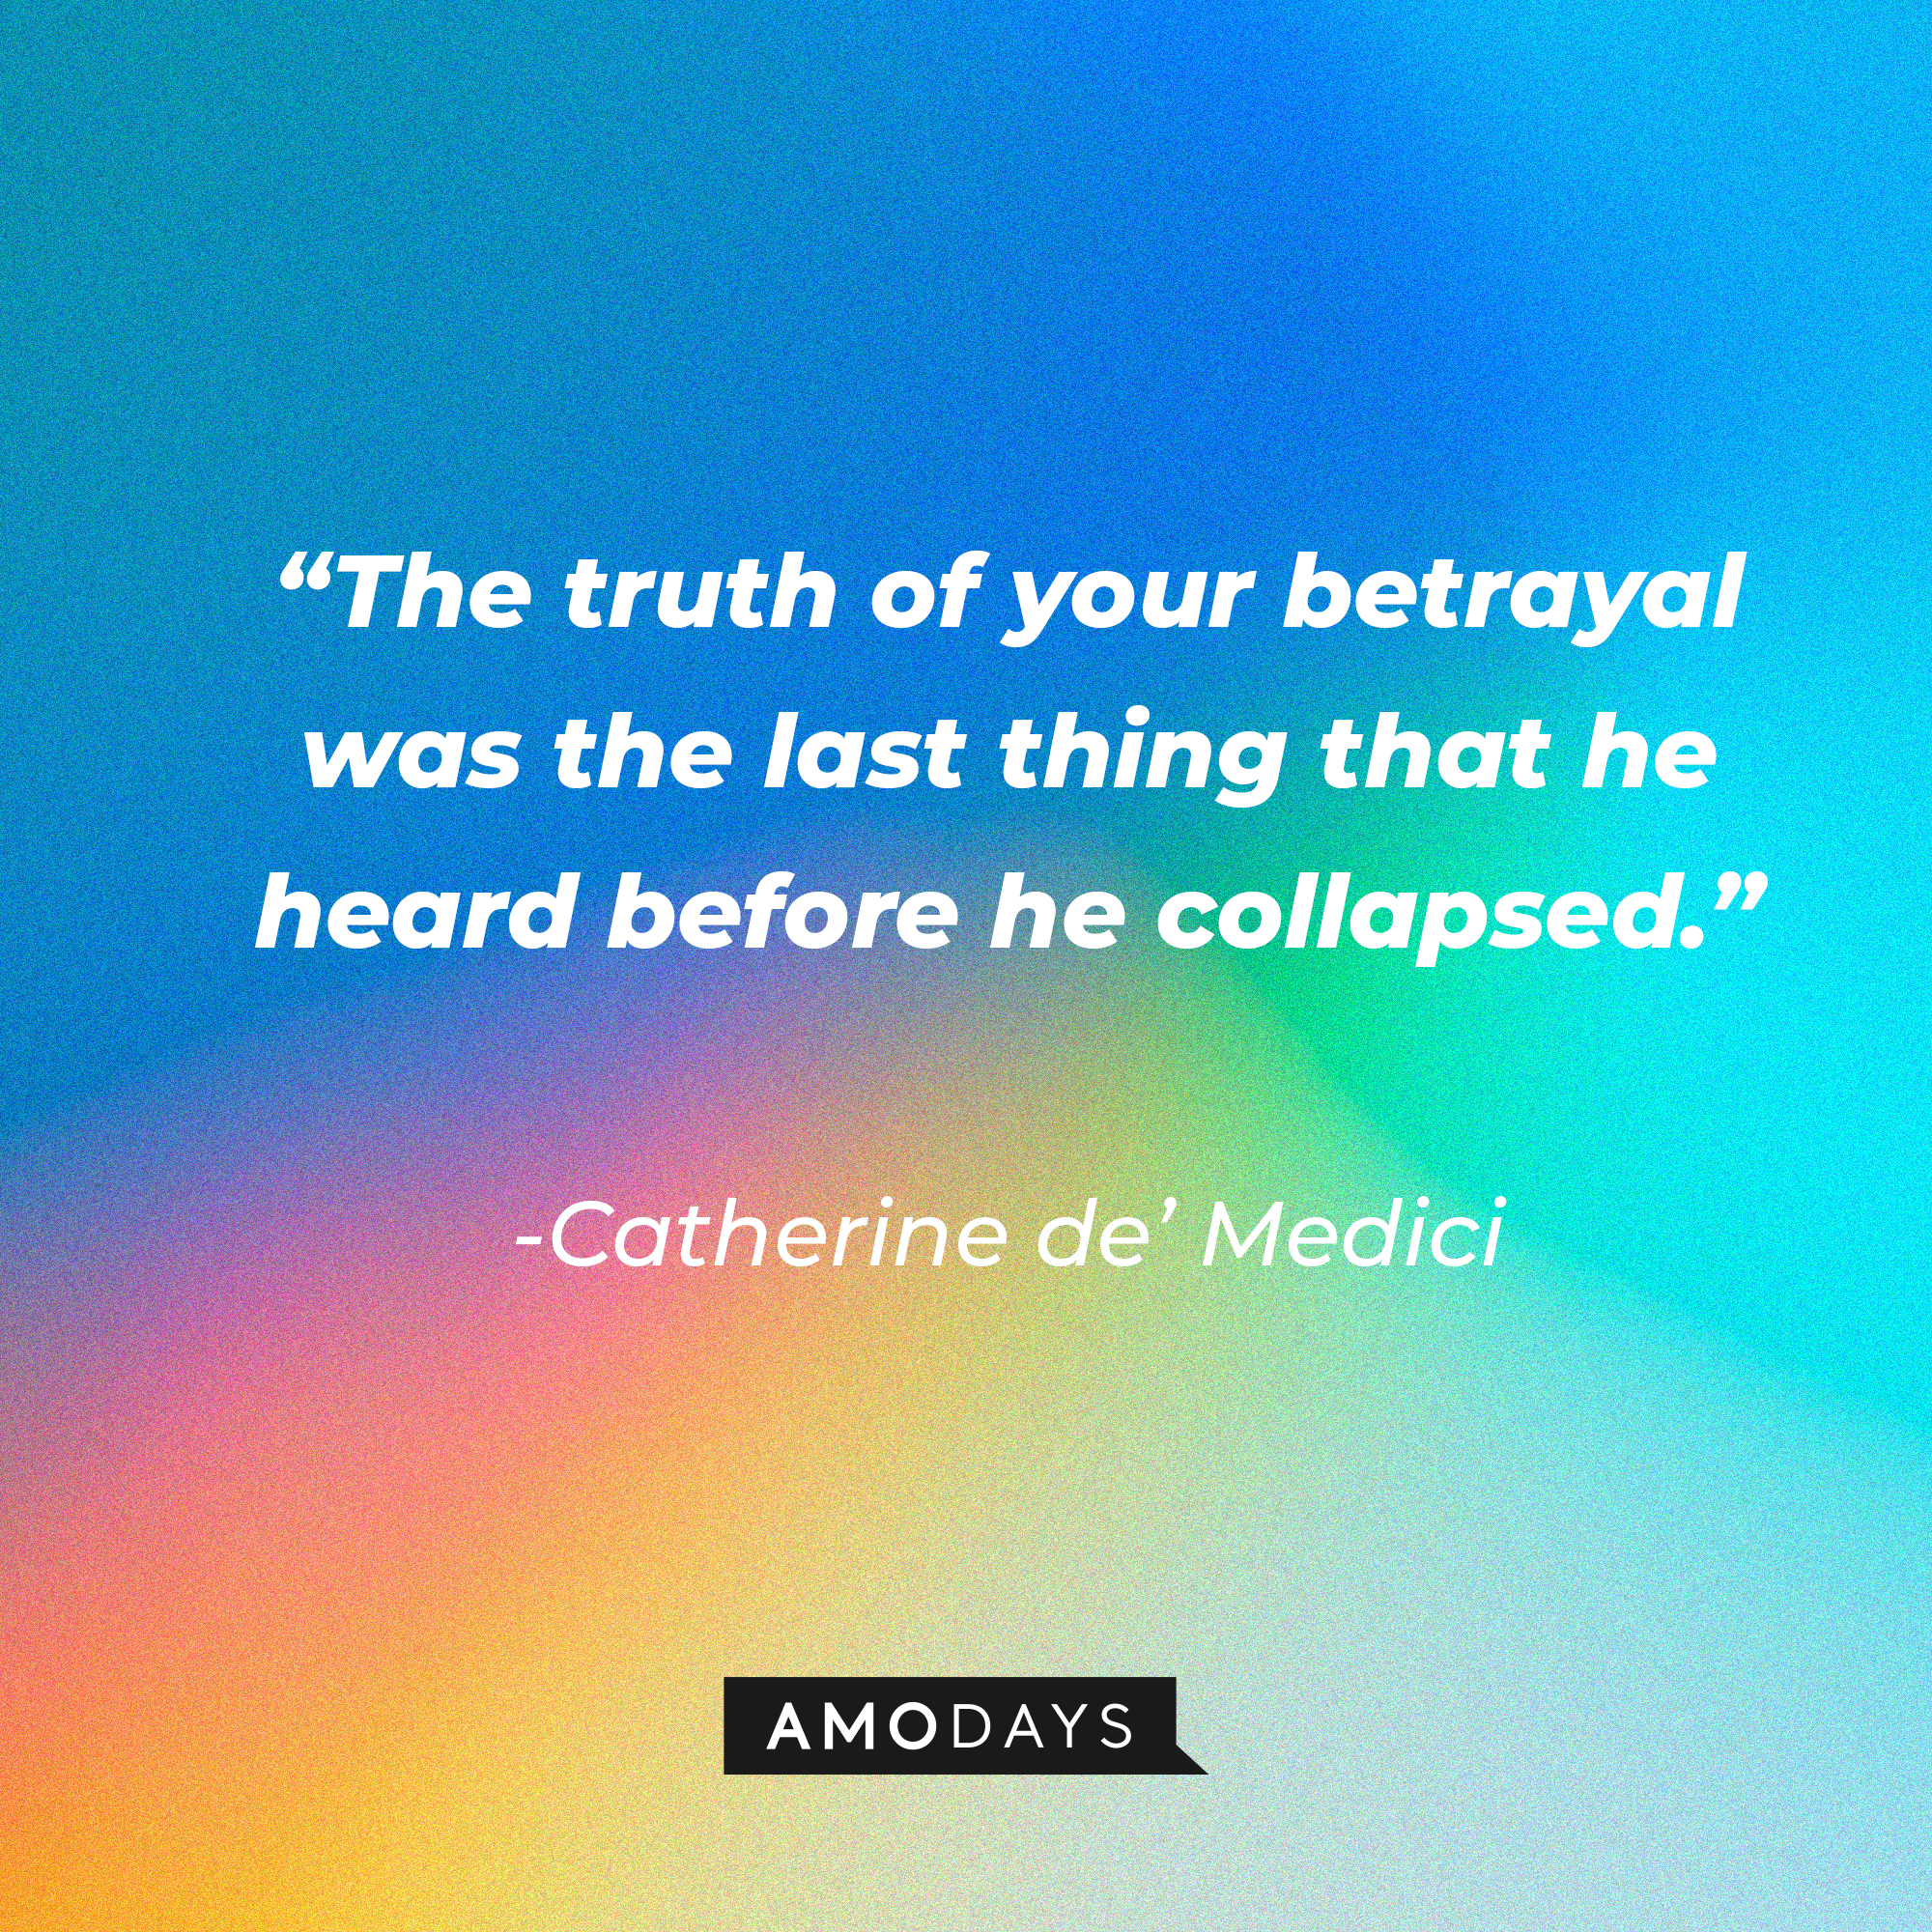 Catherine de’ Medici's quote in "Reign:" “The truth of your betrayal was the last thing that he heard before he collapsed.”  | Source: Amodays